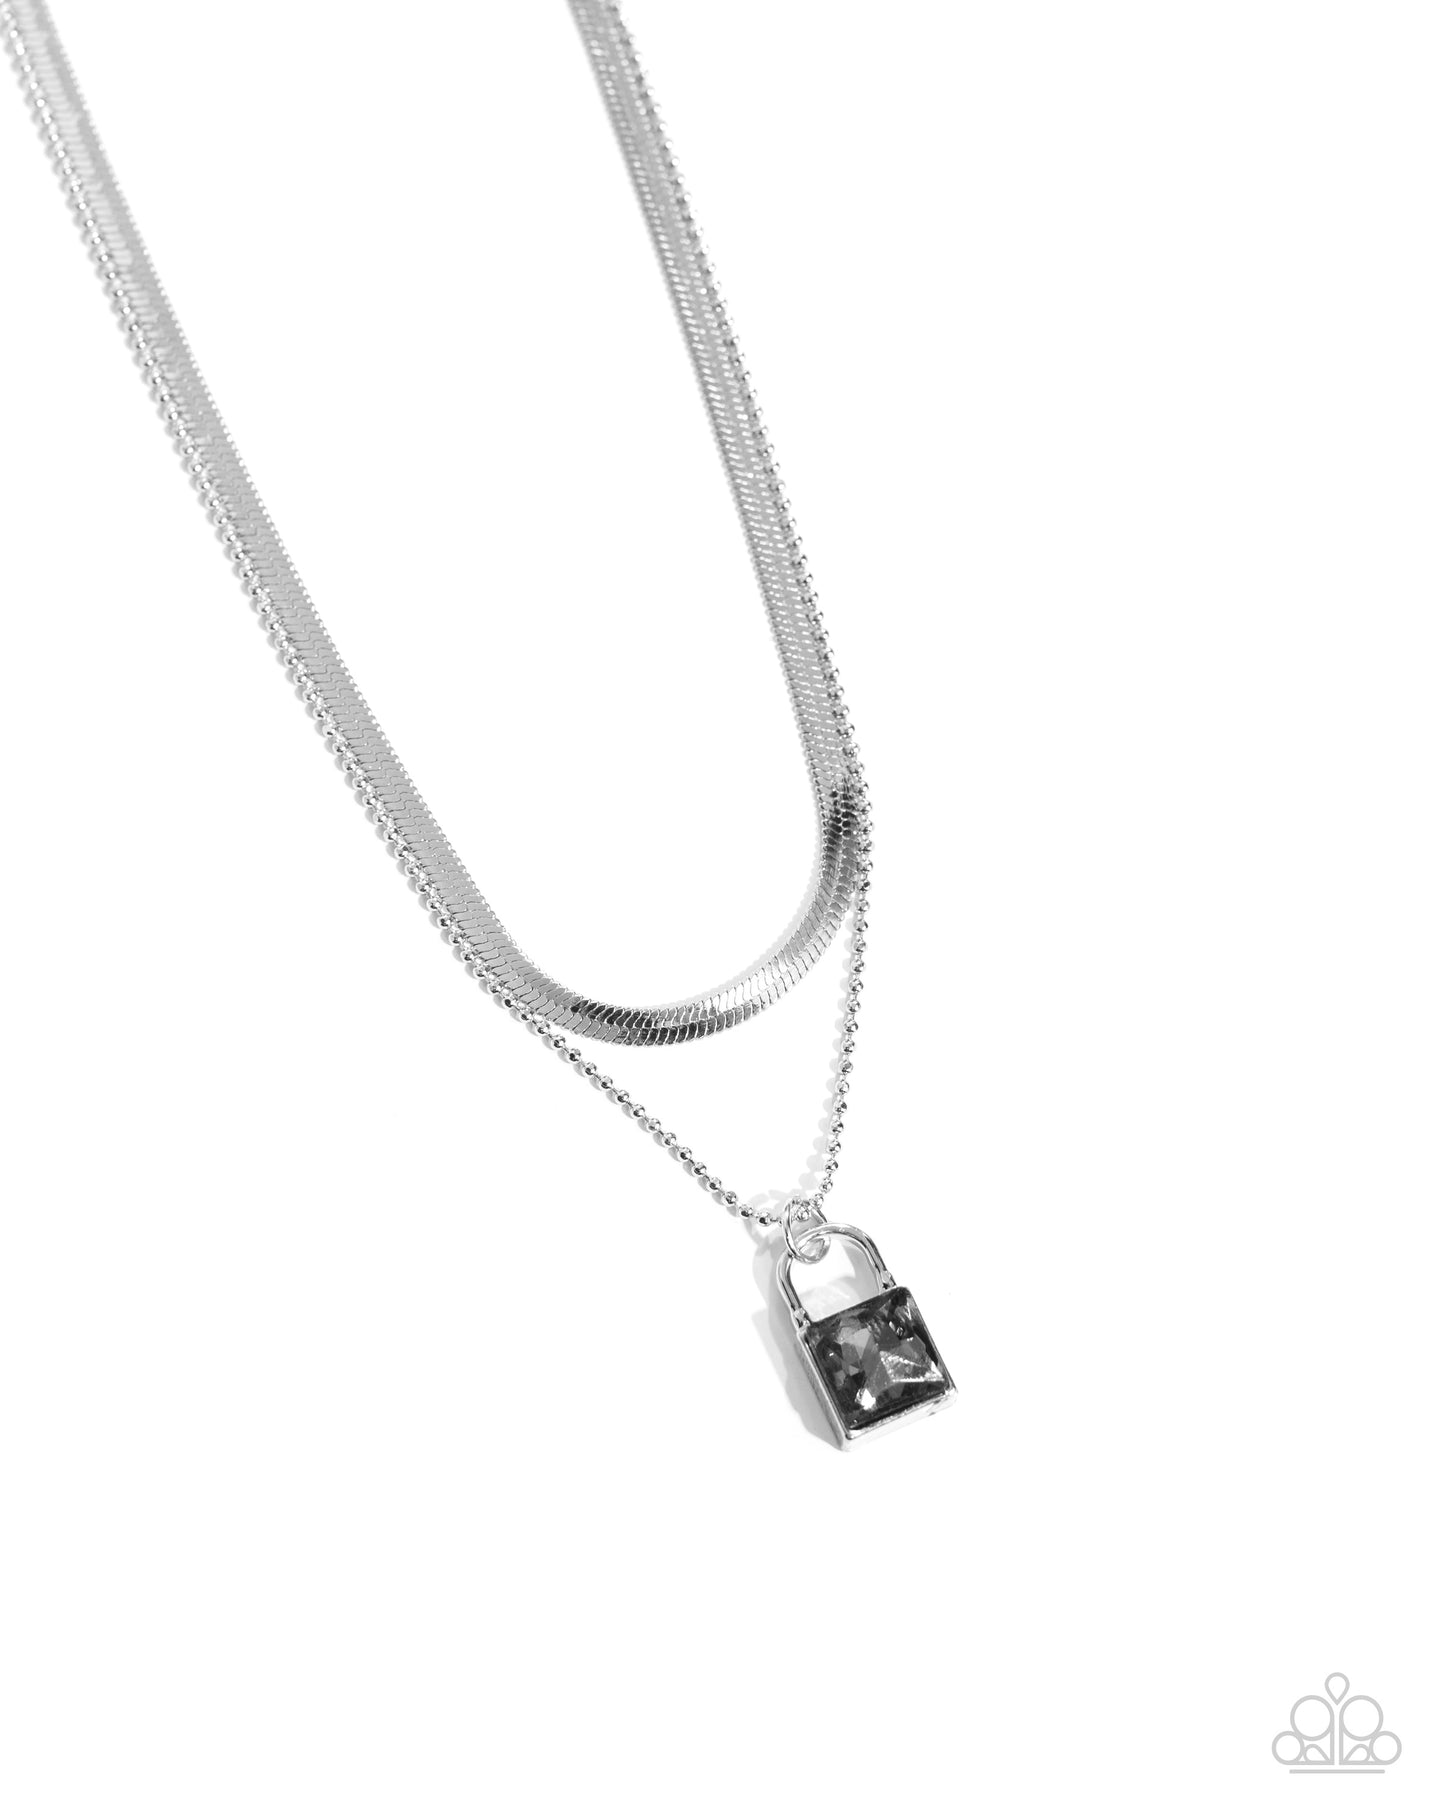 <p>Pressed in a silver padlock pendant, a smoky square gem glistens and glides along a dainty silver ball chain. Layered above the gritty glittery display, a silver herringbone chain creates additional edge and detail. Features an adjustable clasp closure.</p> <p><i> Sold as one individual necklace. Includes one pair of matching earrings.</i></p>